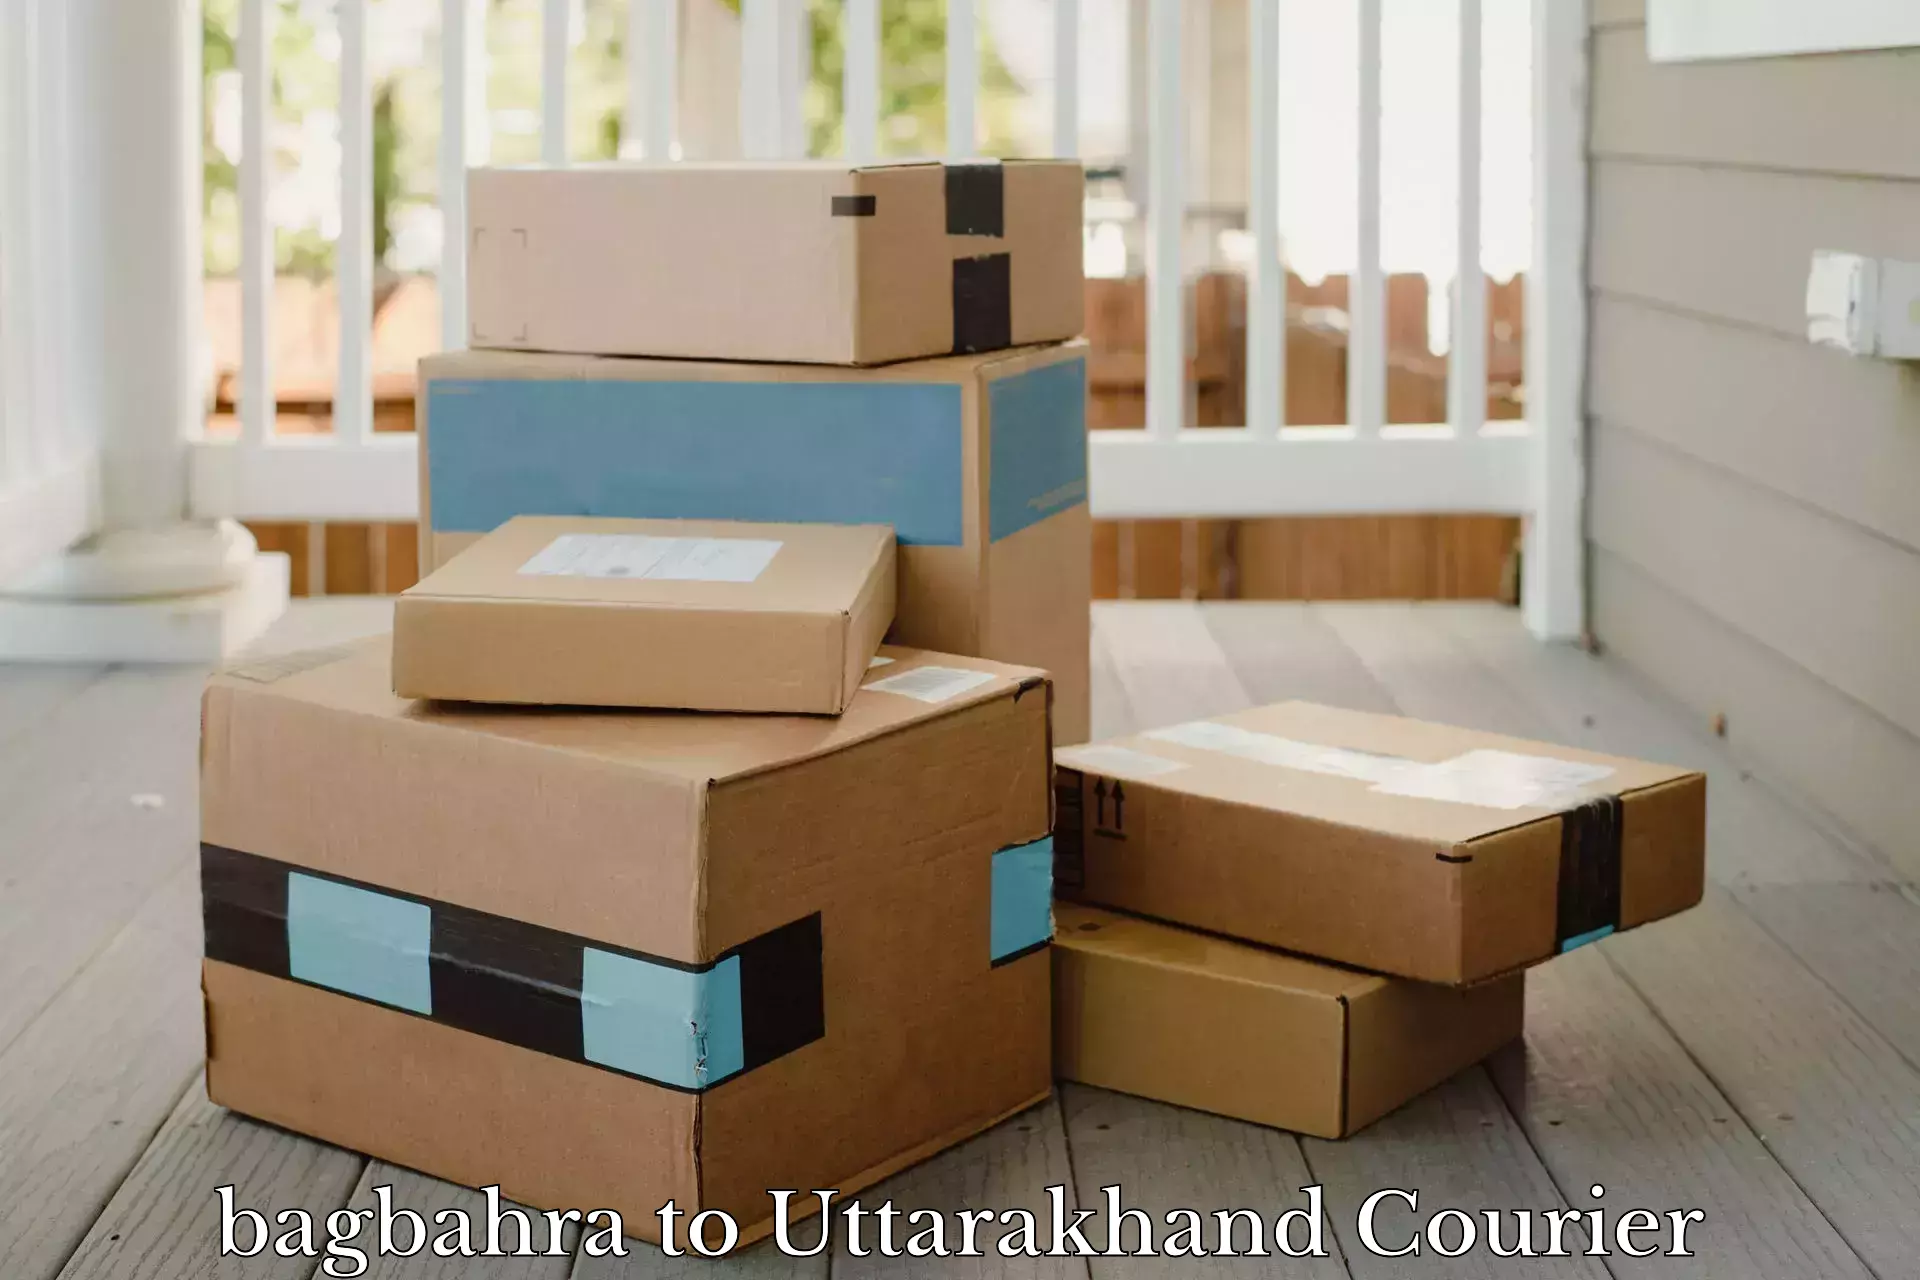 Reliable parcel services bagbahra to Rishikesh